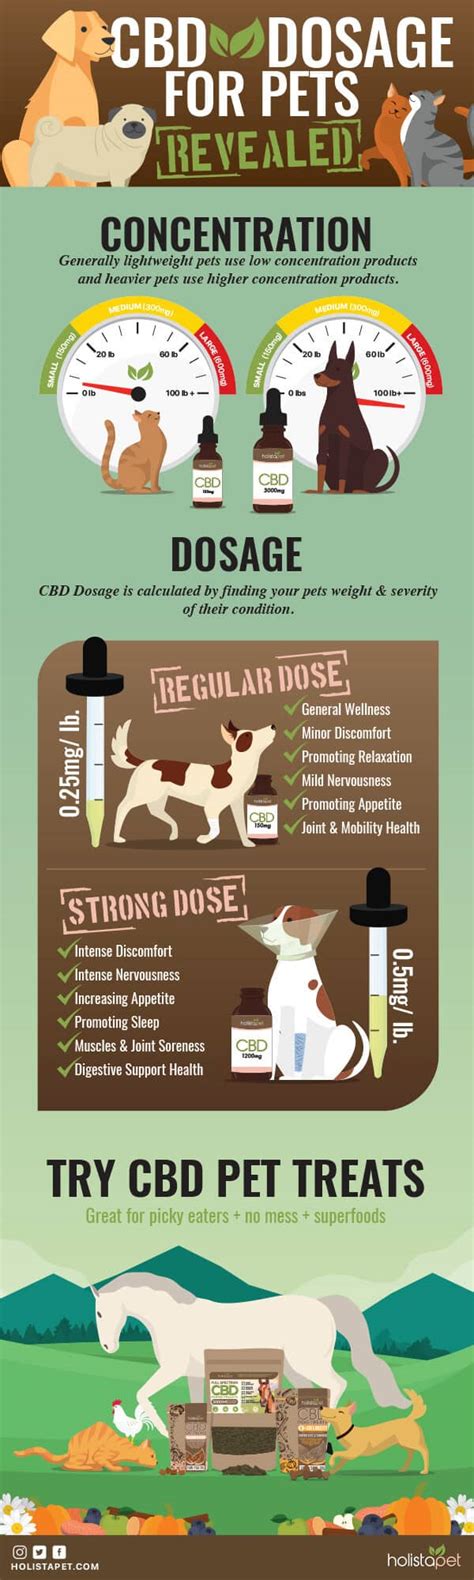  With the right dosage, CBD can be a valuable addition to your pet